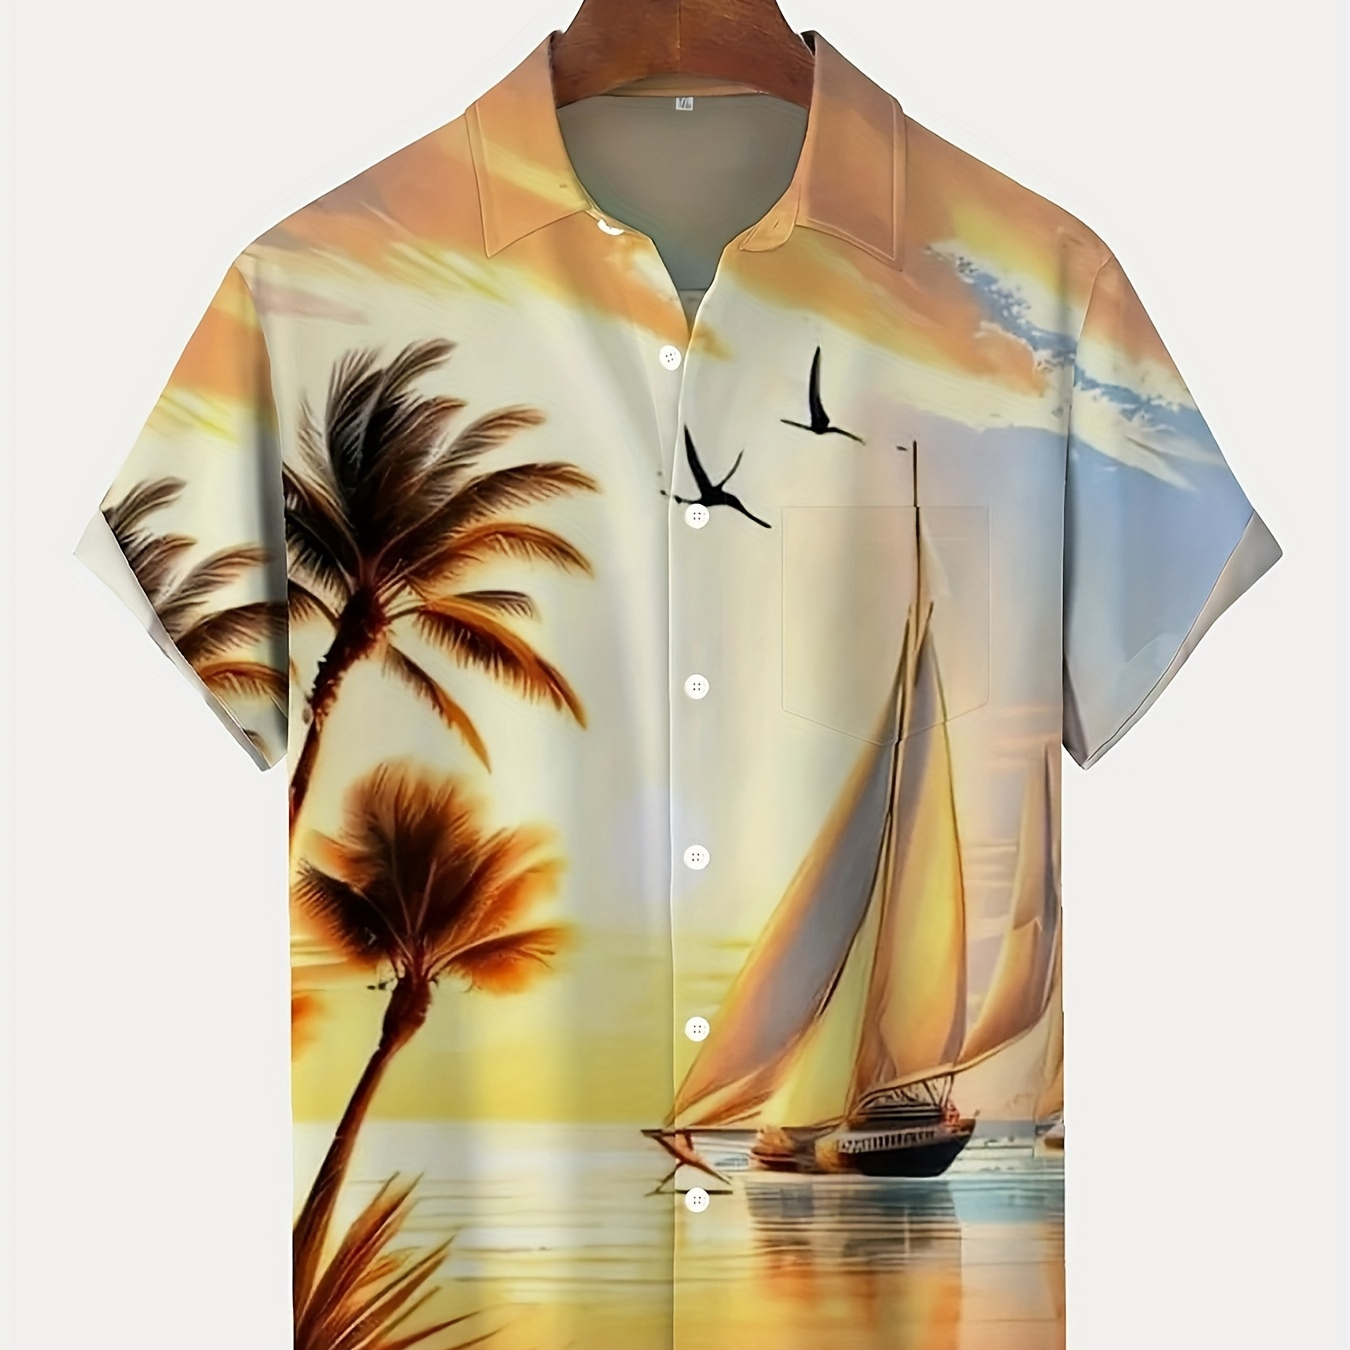 

Sunset Coconut Tree And Sailboat 3d Graphic Print, Men's Short Sleeve Button Down Shirt With Chest Pocket, Summer Resort Vacation